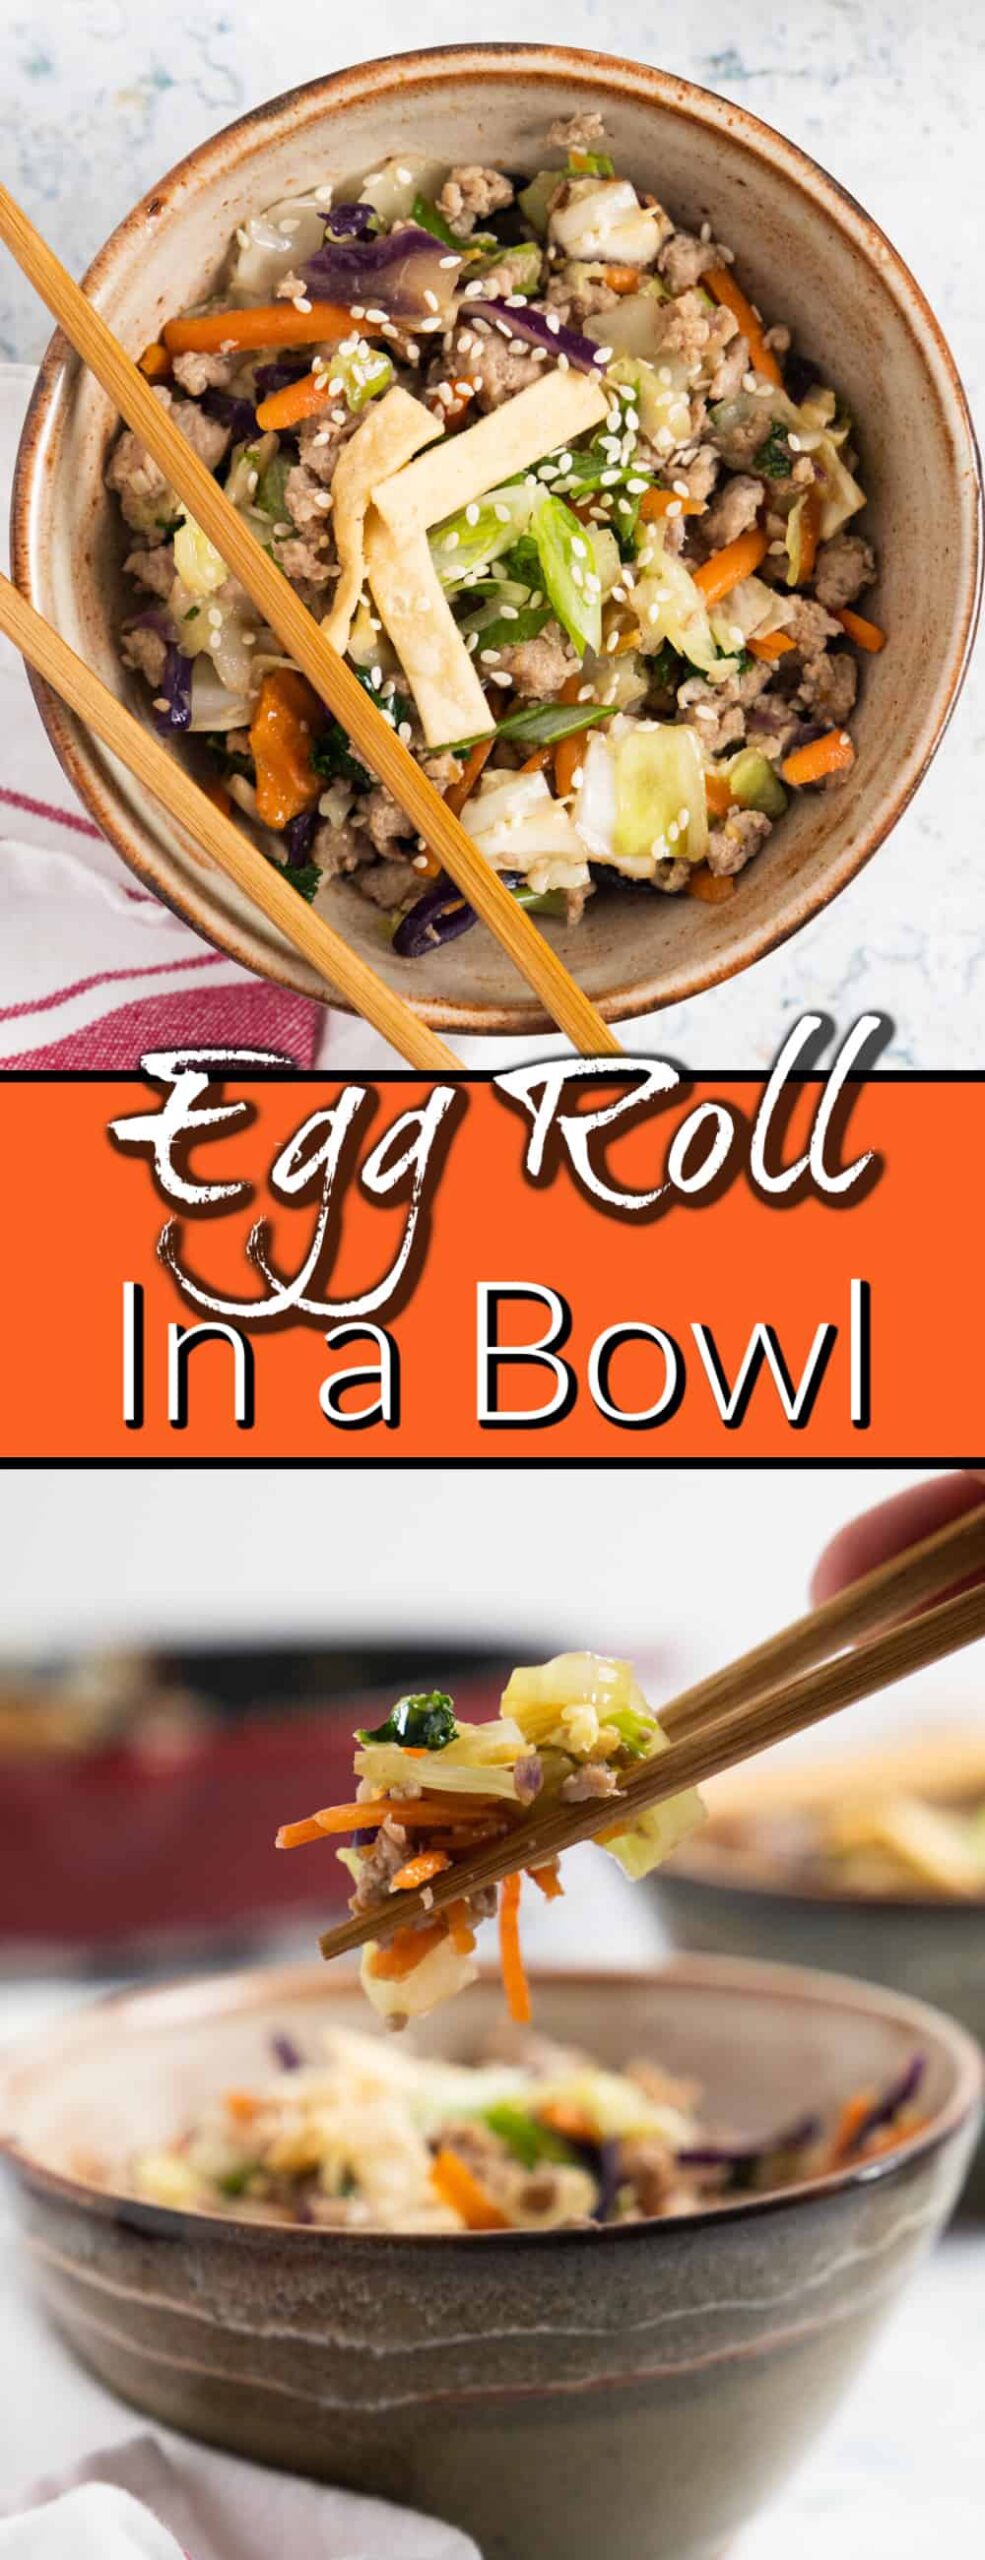 Egg Roll in a Bowl - Noshing With the Nolands